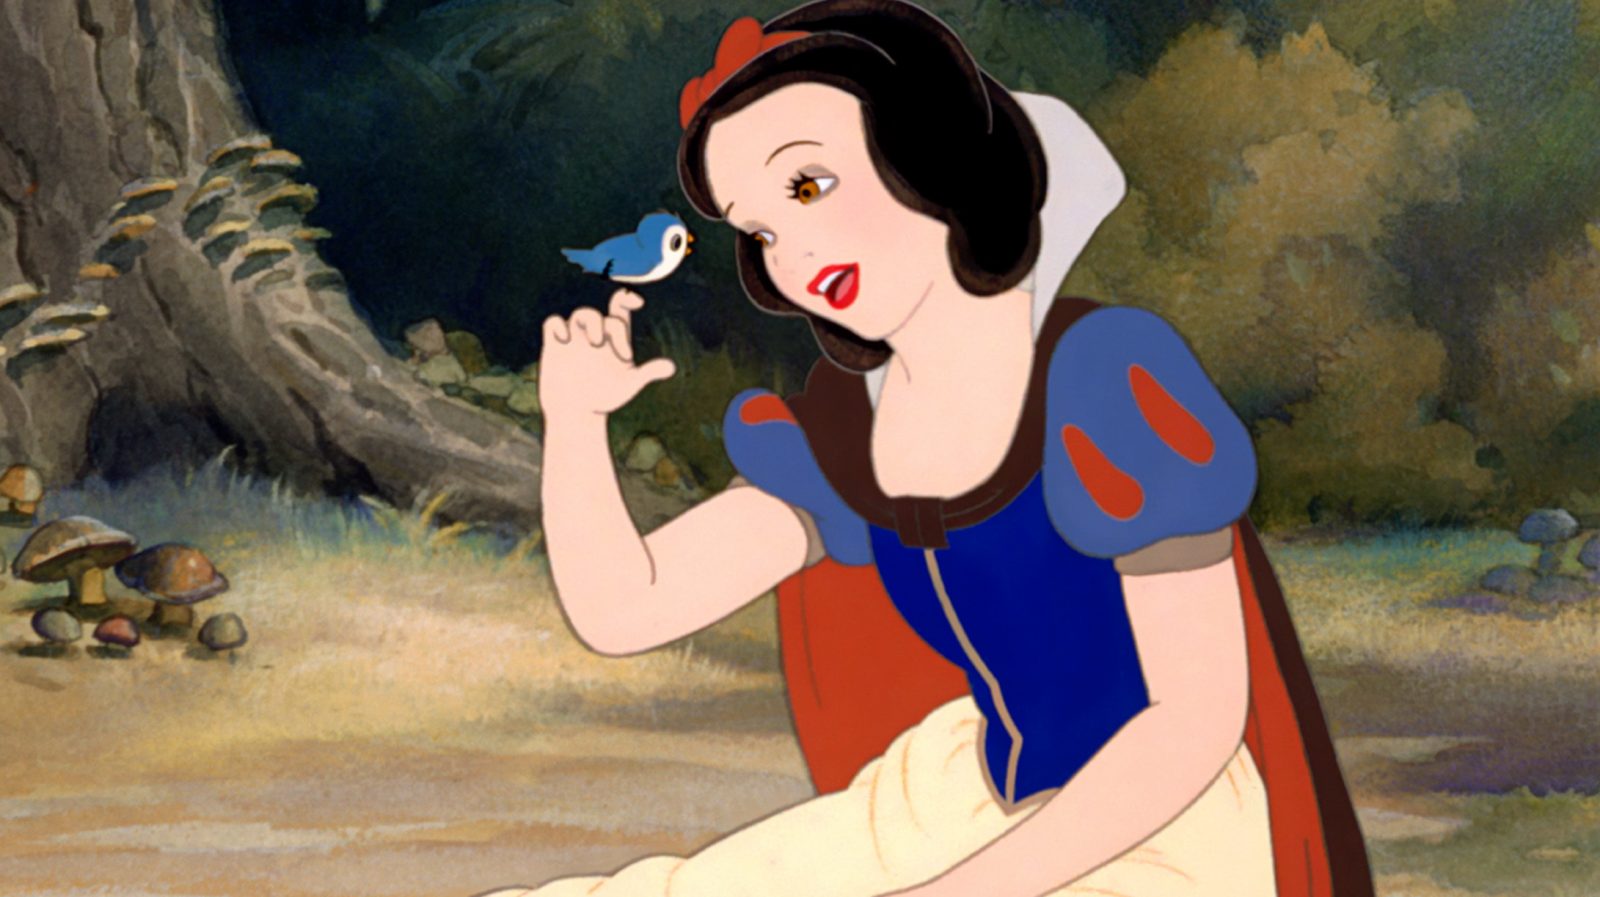 I Bet You Can't Get 13 on This General Knowledge Quiz feat. Disney Snow White